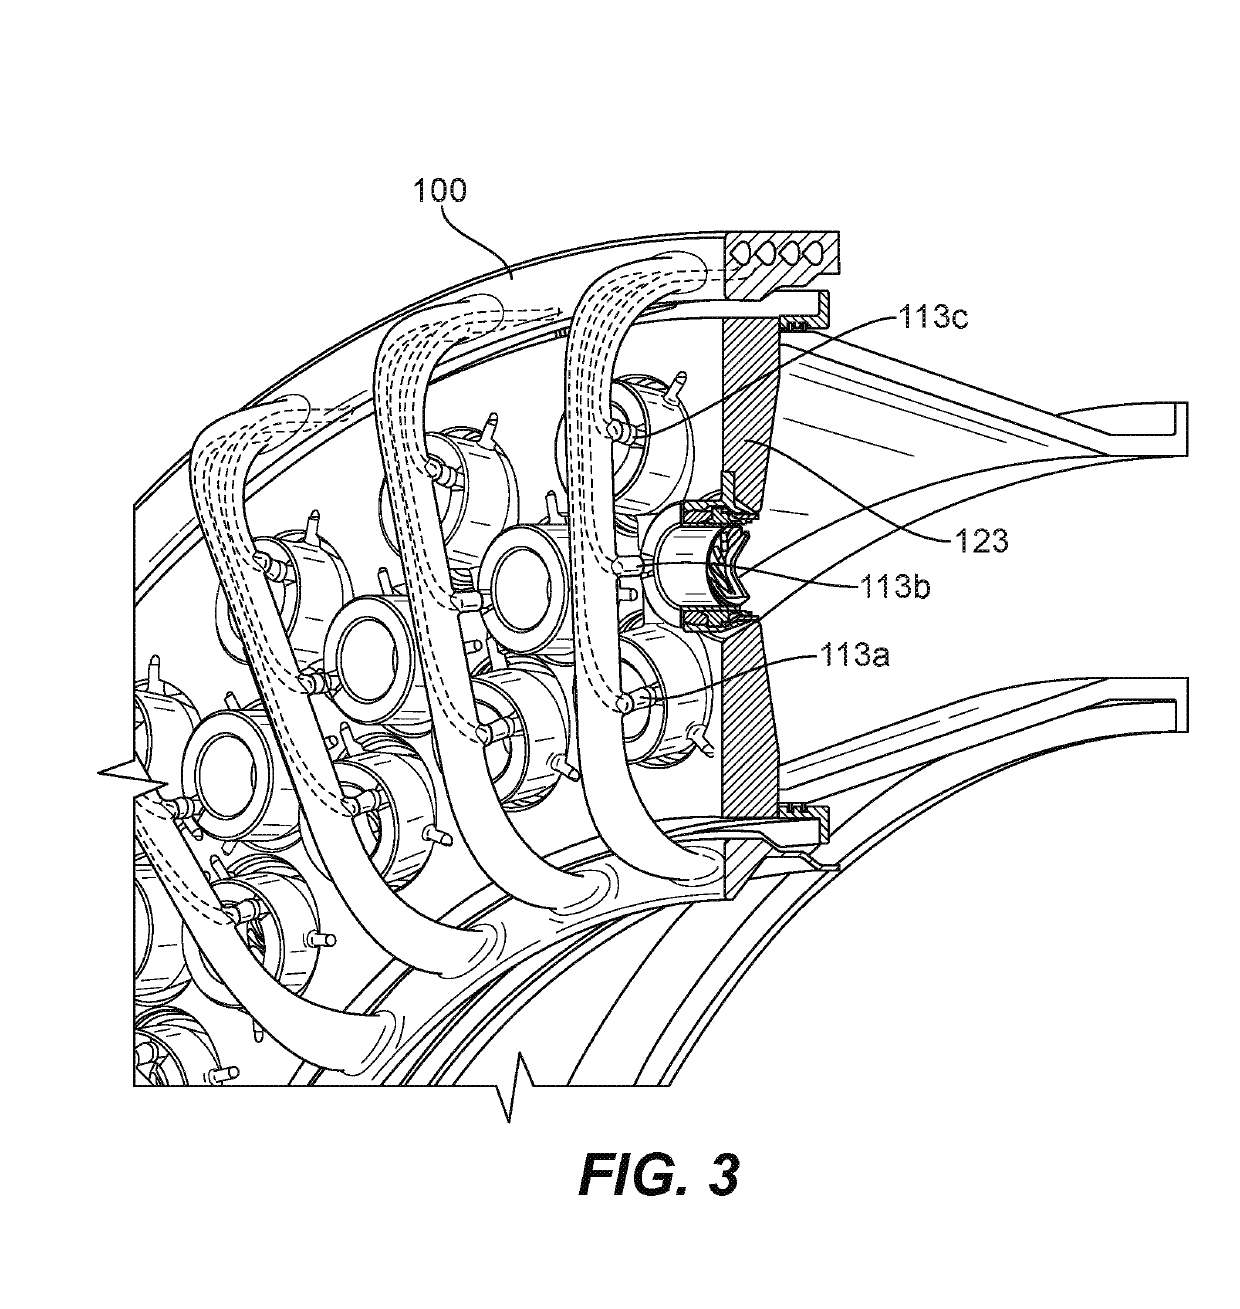 Fuel injectors for turbomachines having inner air swirling